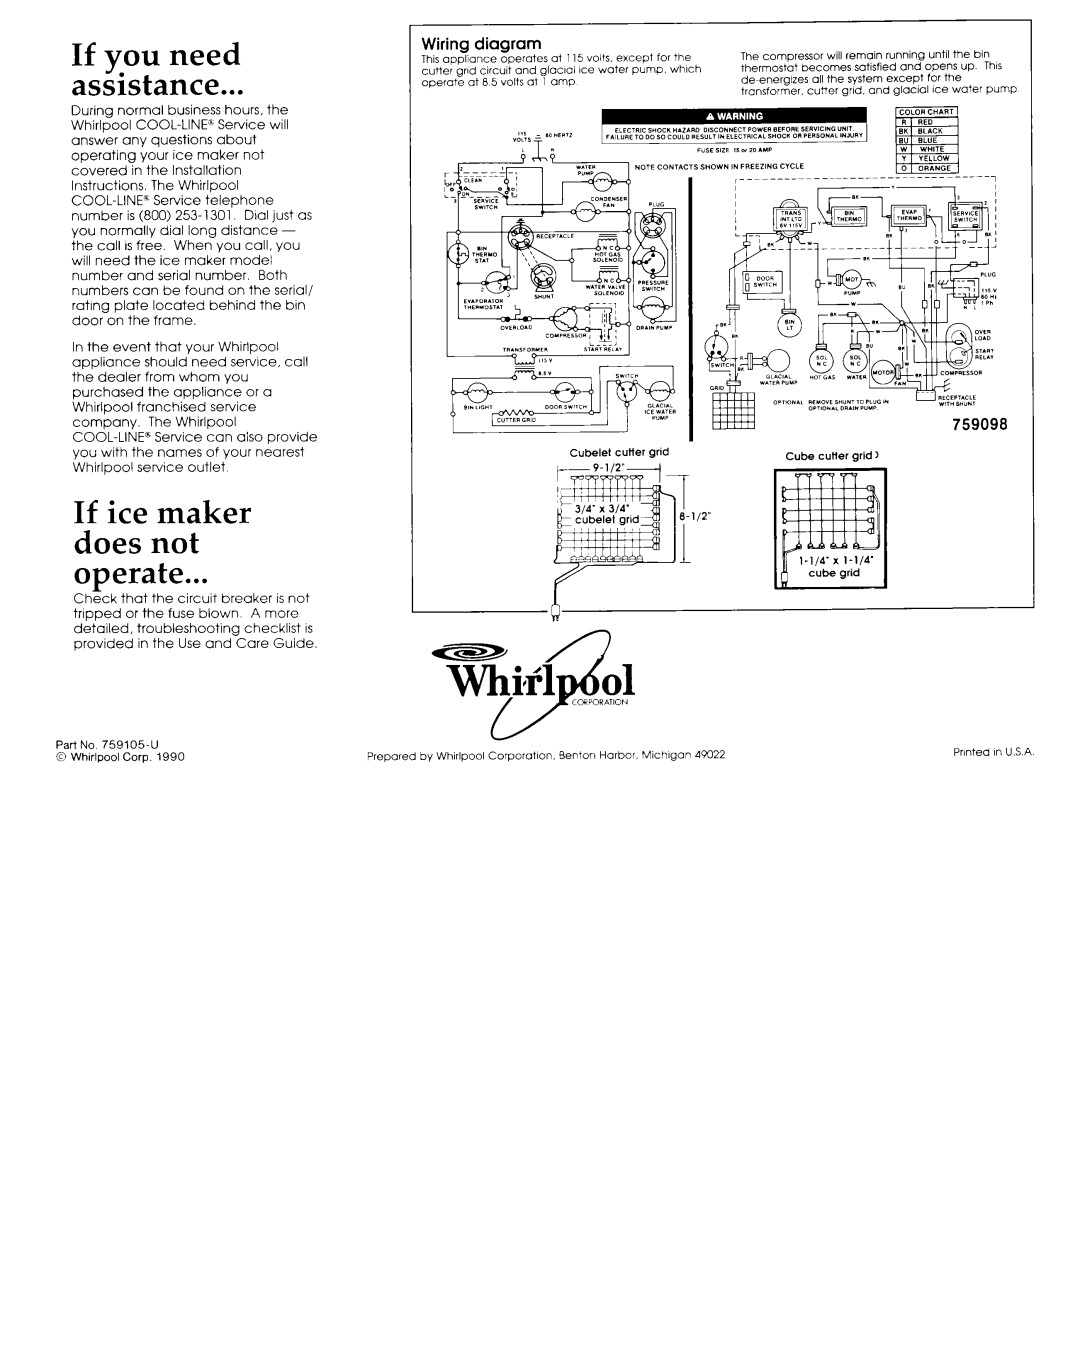 Whirlpool 759105-U manual If you need assistance, If ice maker does not operate, Wiring diagram 